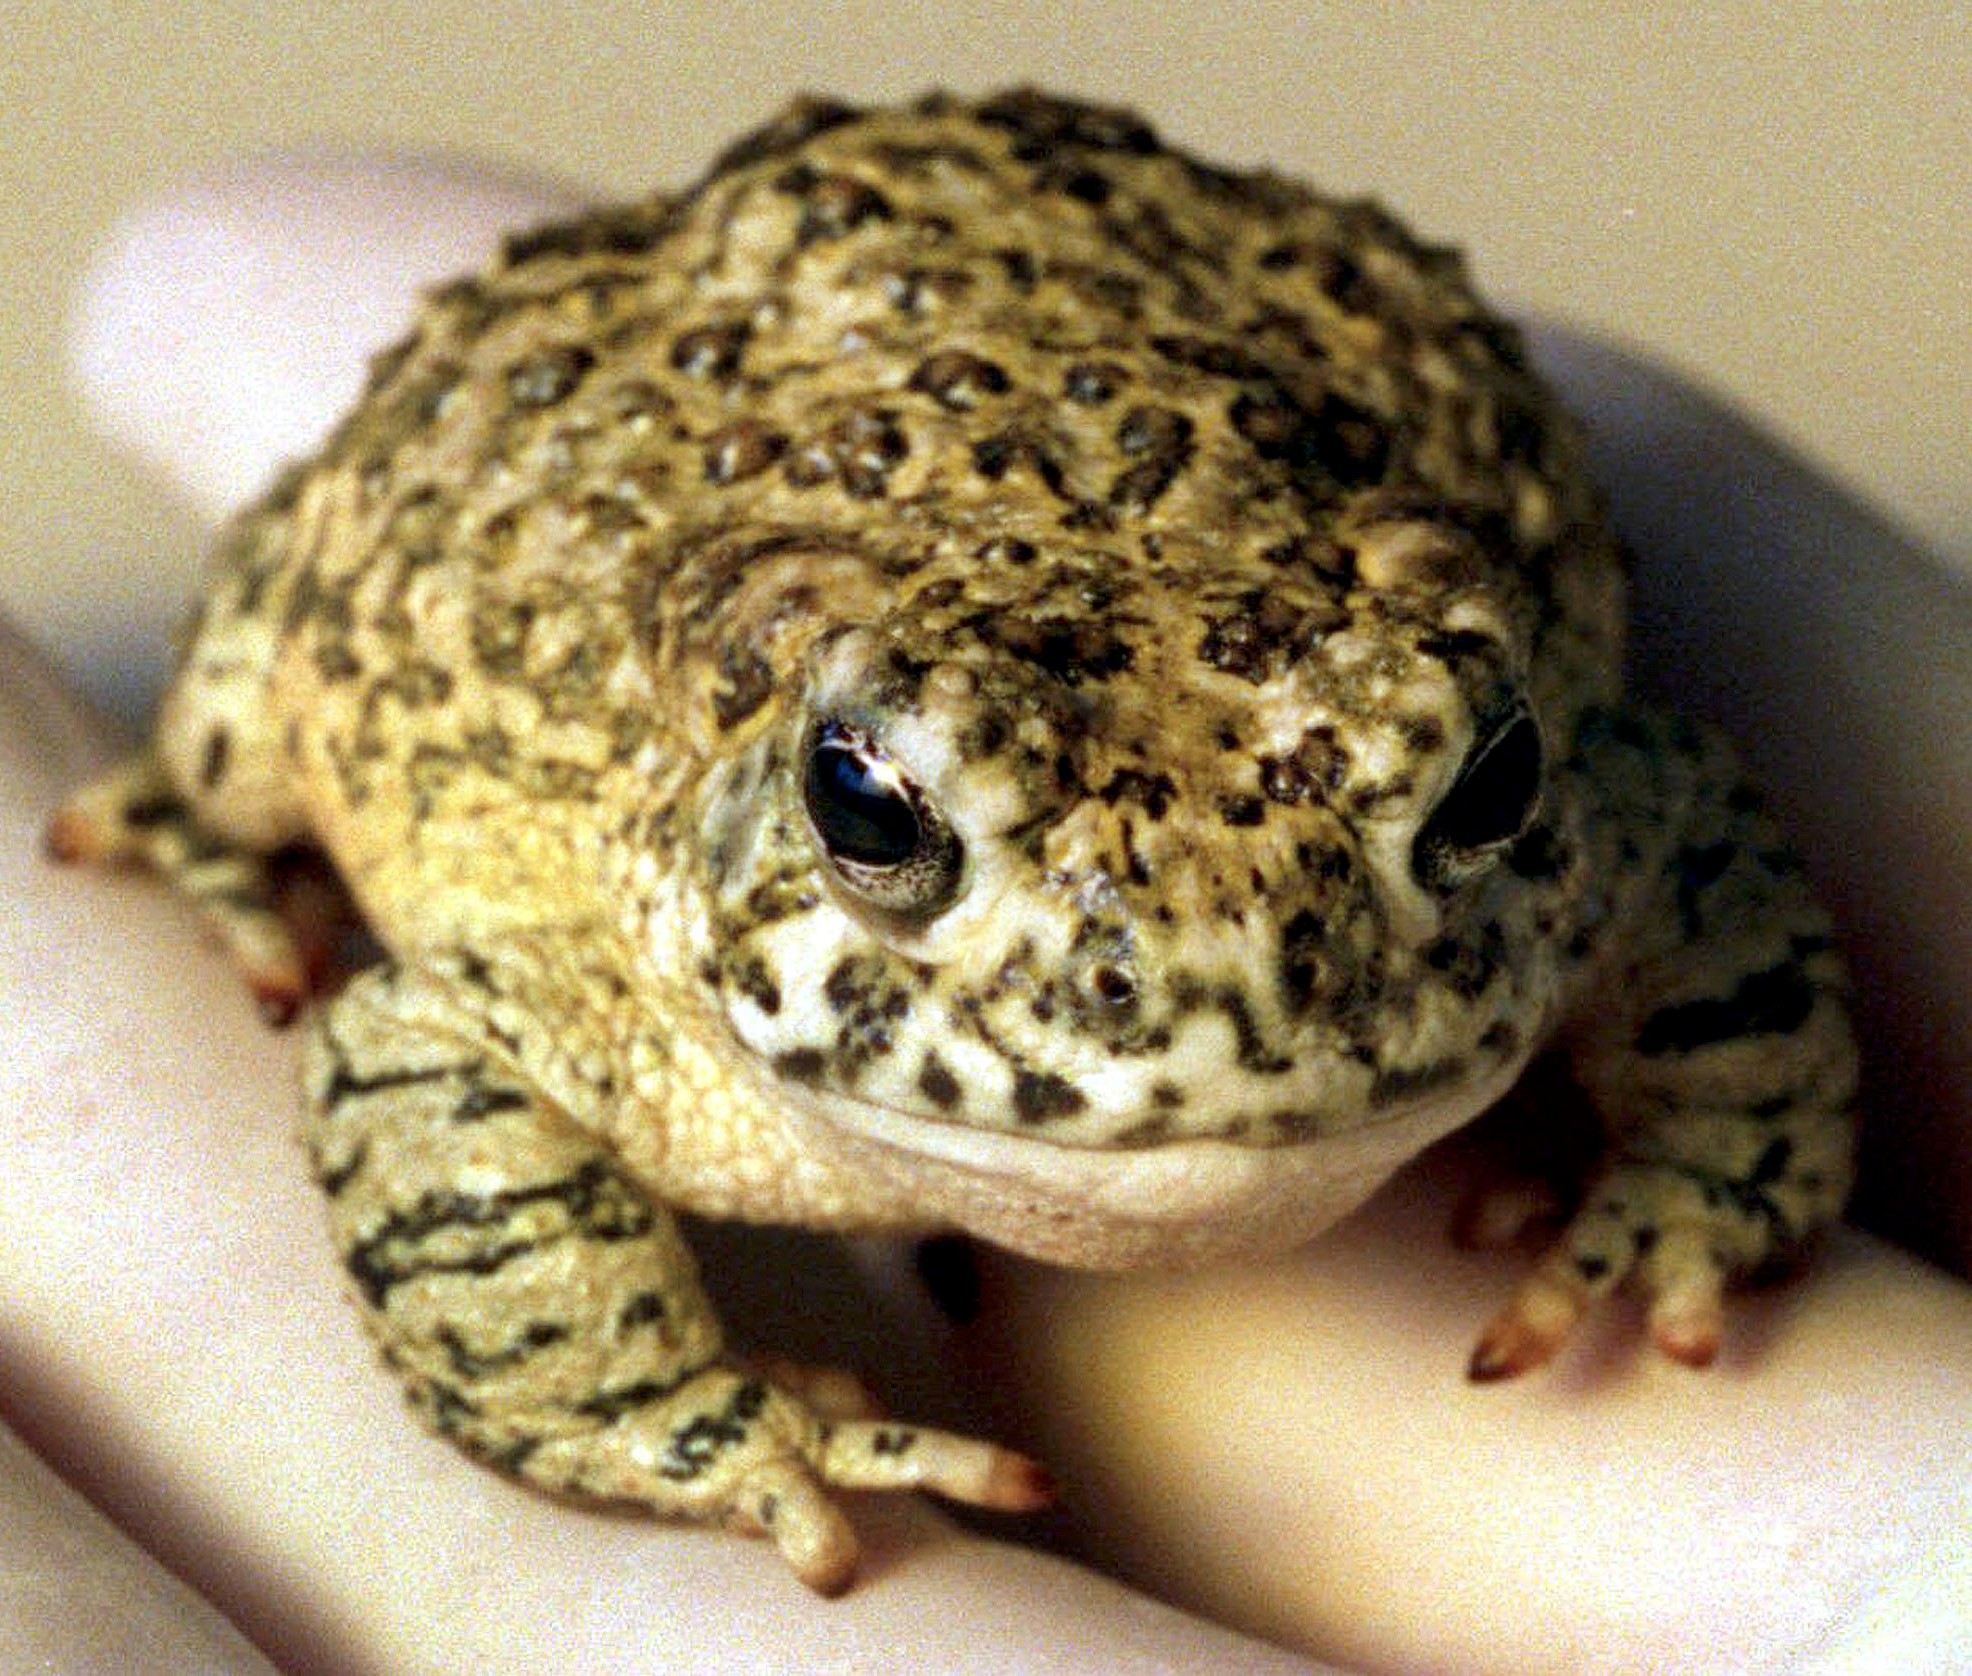 A yellow and black speckled toad